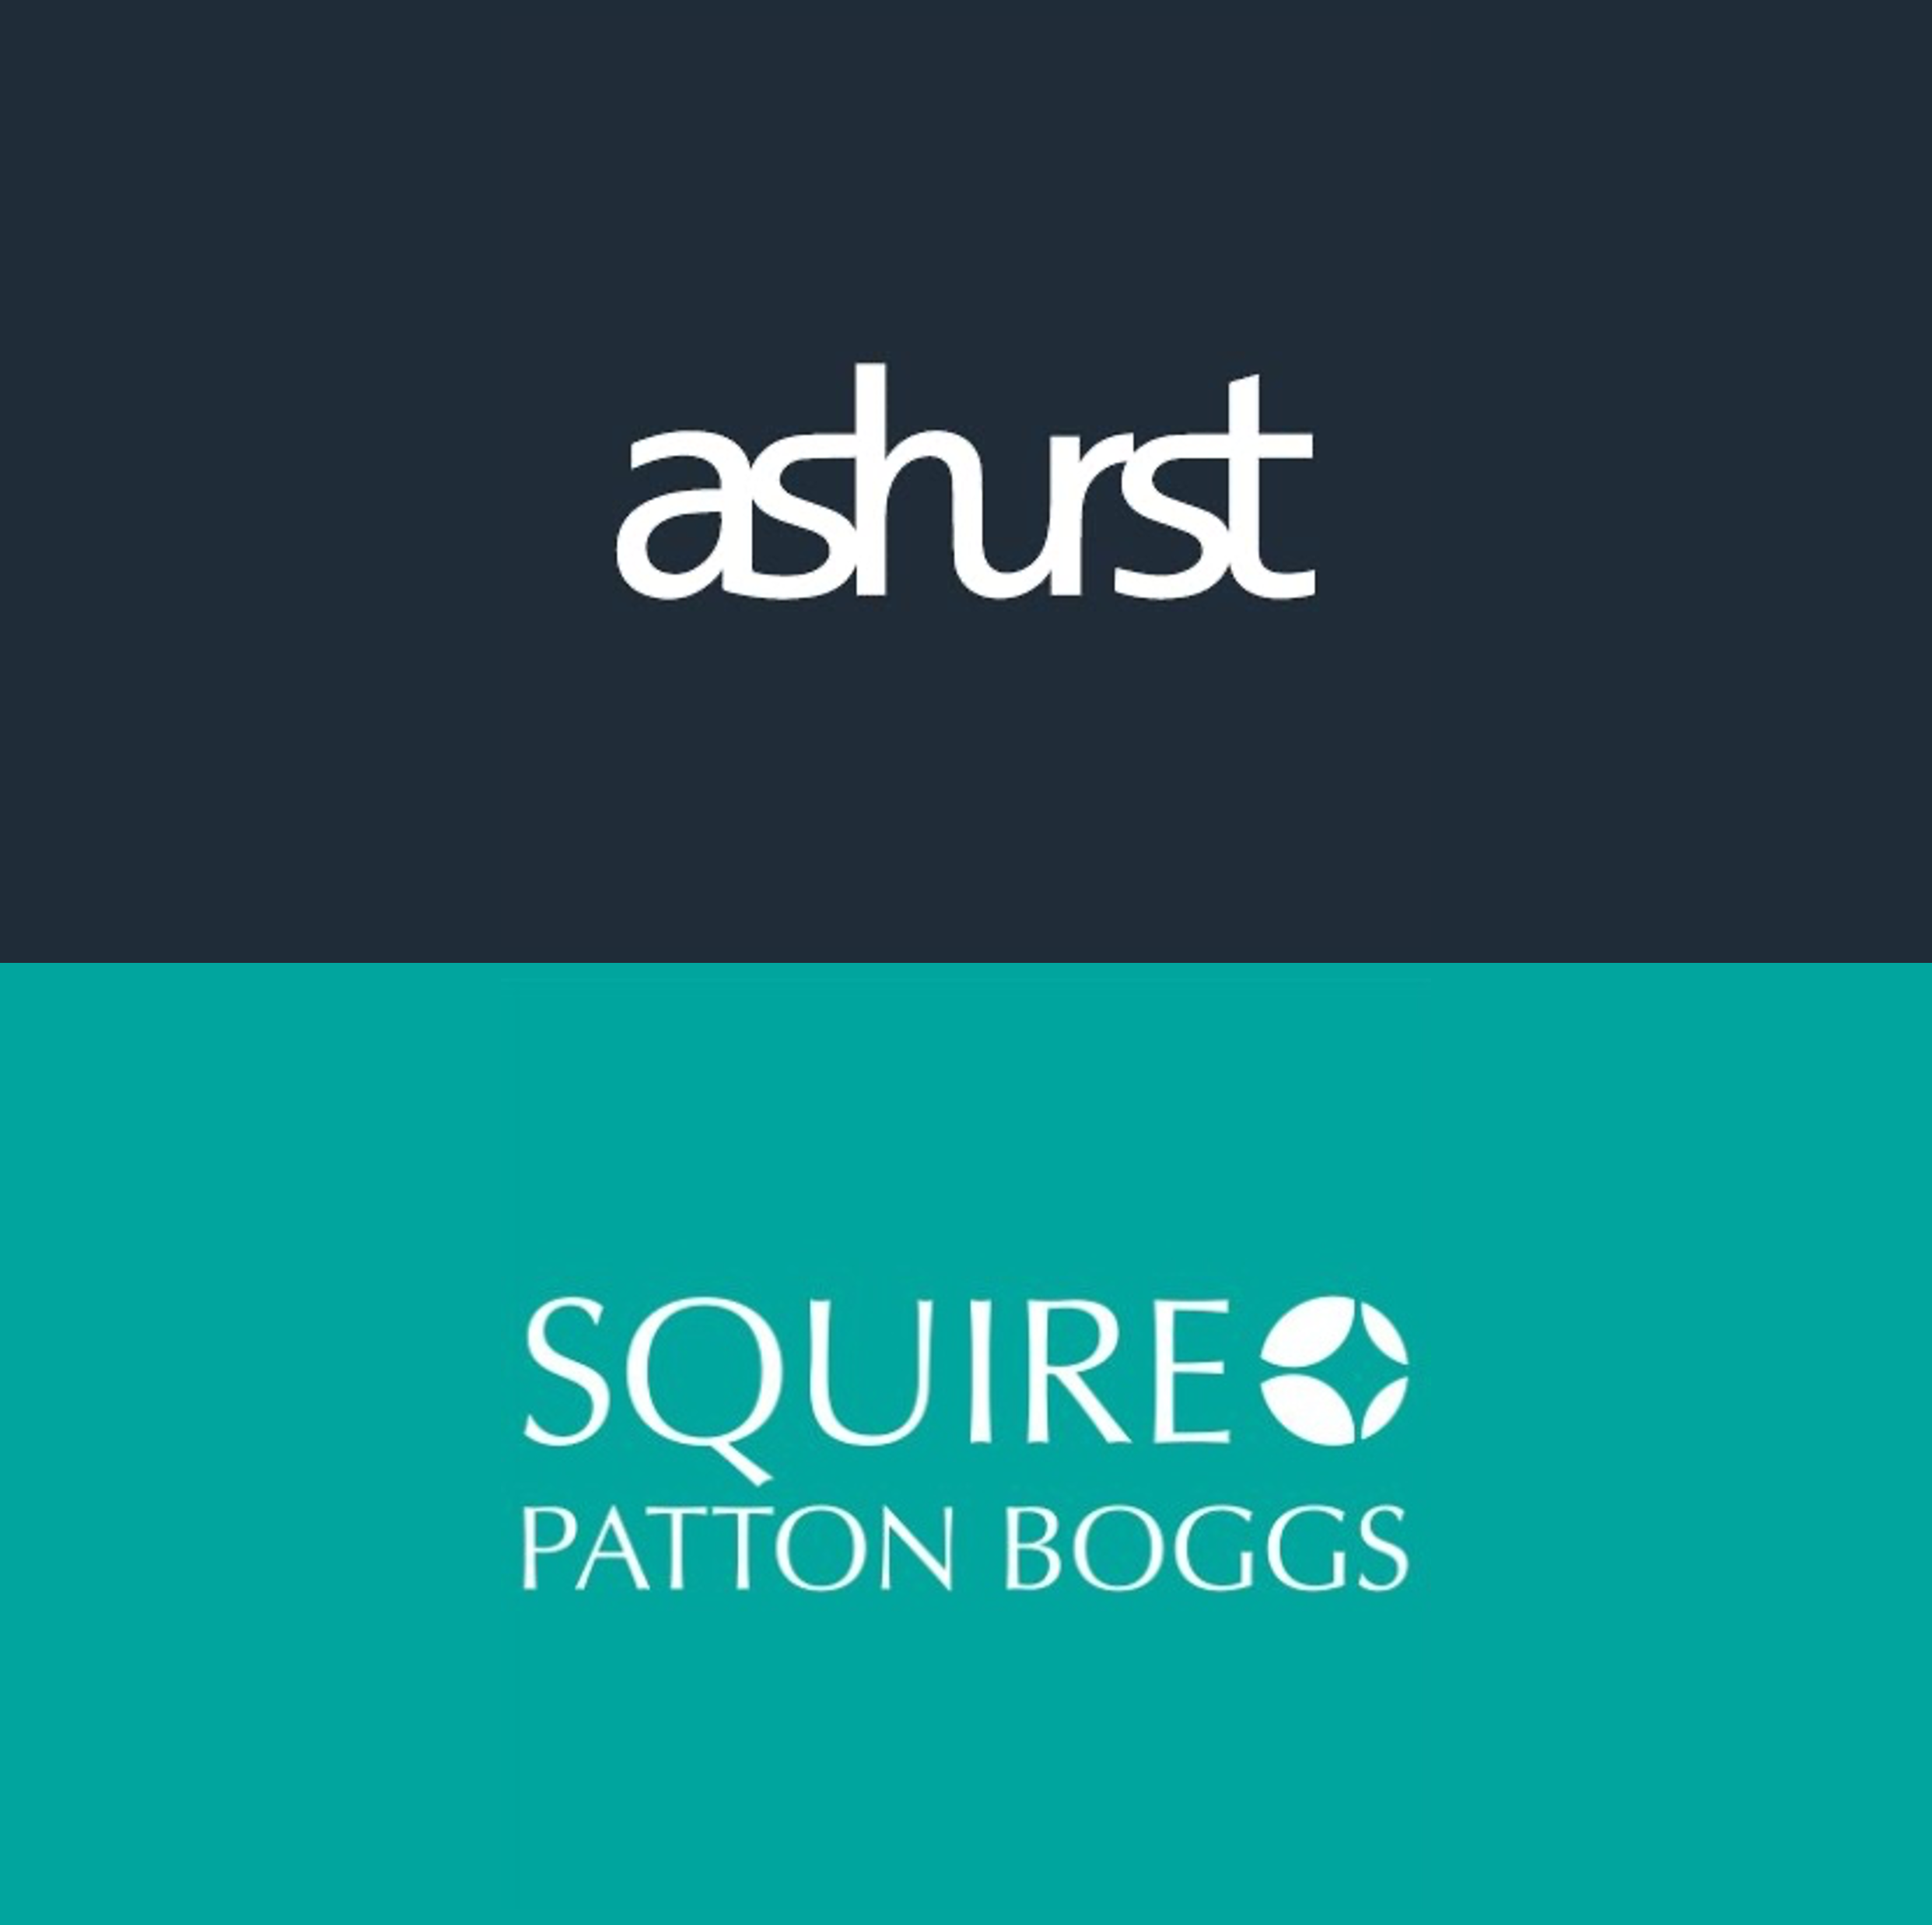 Ashurst and Squire Patton Boggs